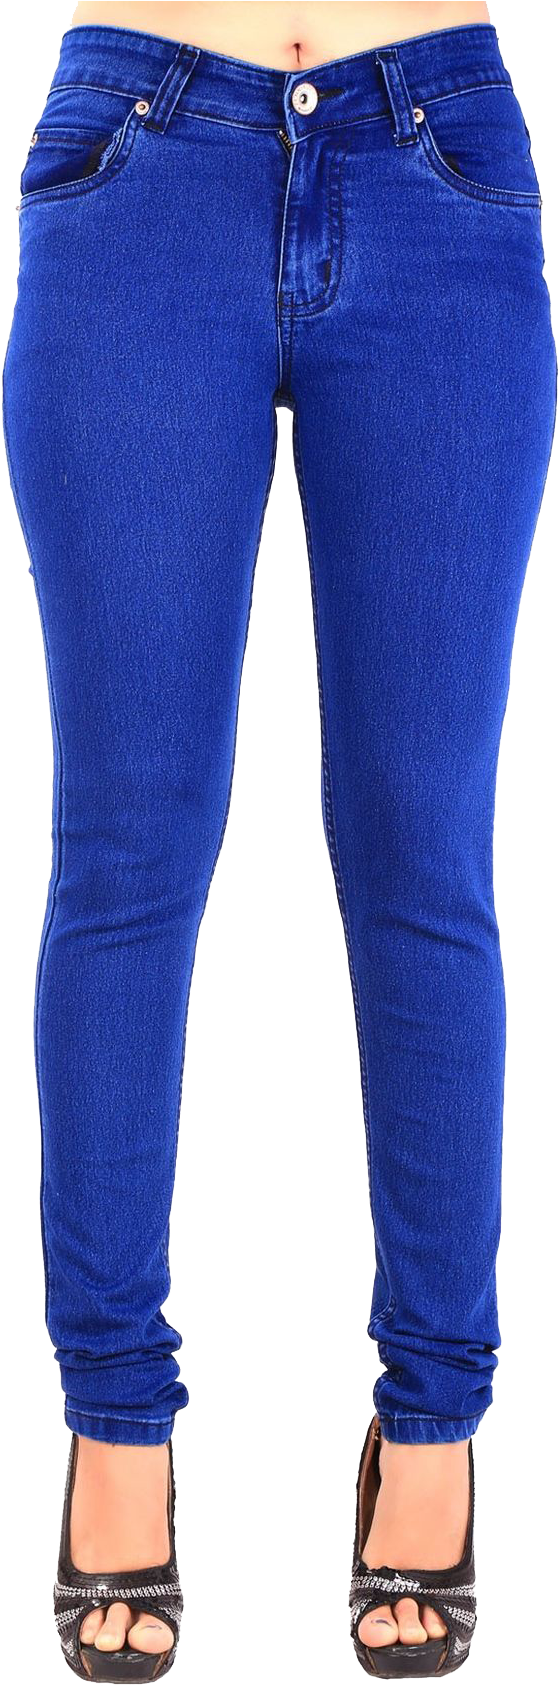 Blue Skinny Jeans Product Display PNG image